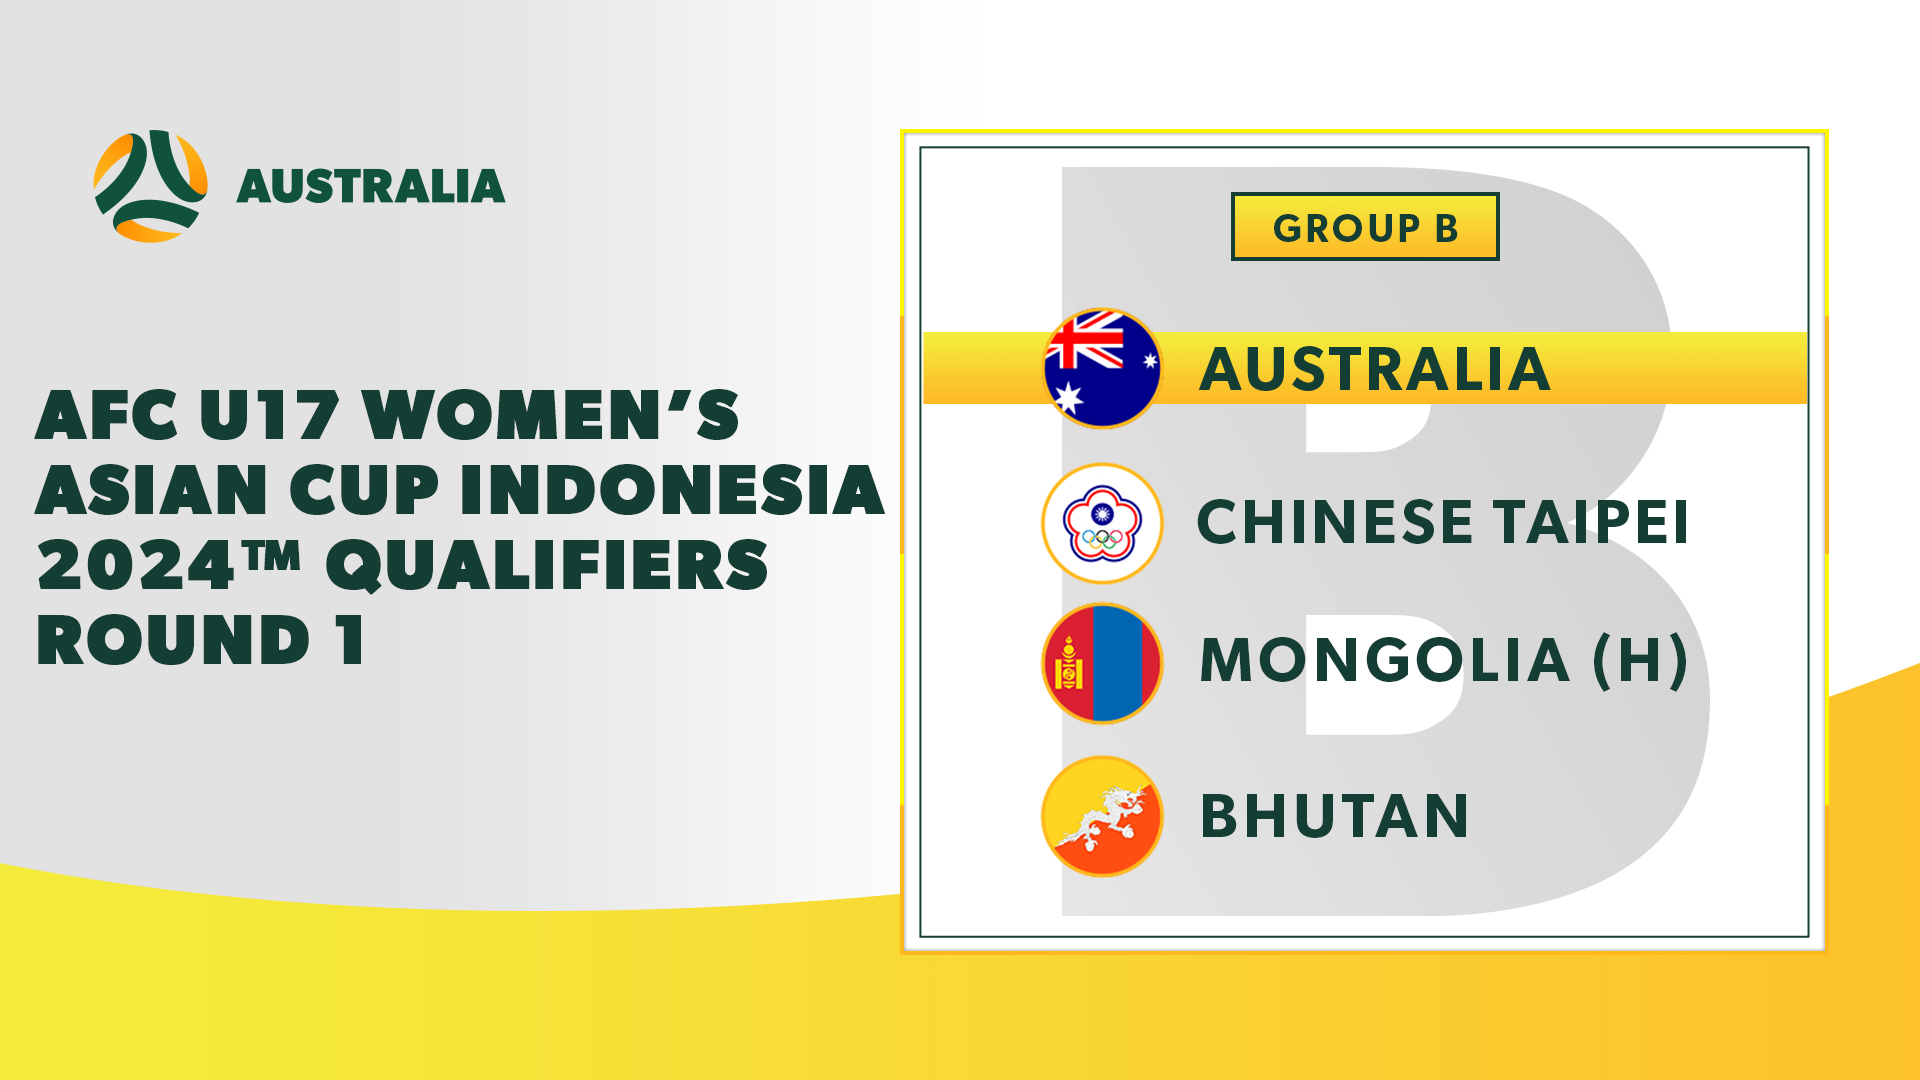 Australia's AFC U17 Women’s Asian Cup Indonesia 2024™ Qualifying Group